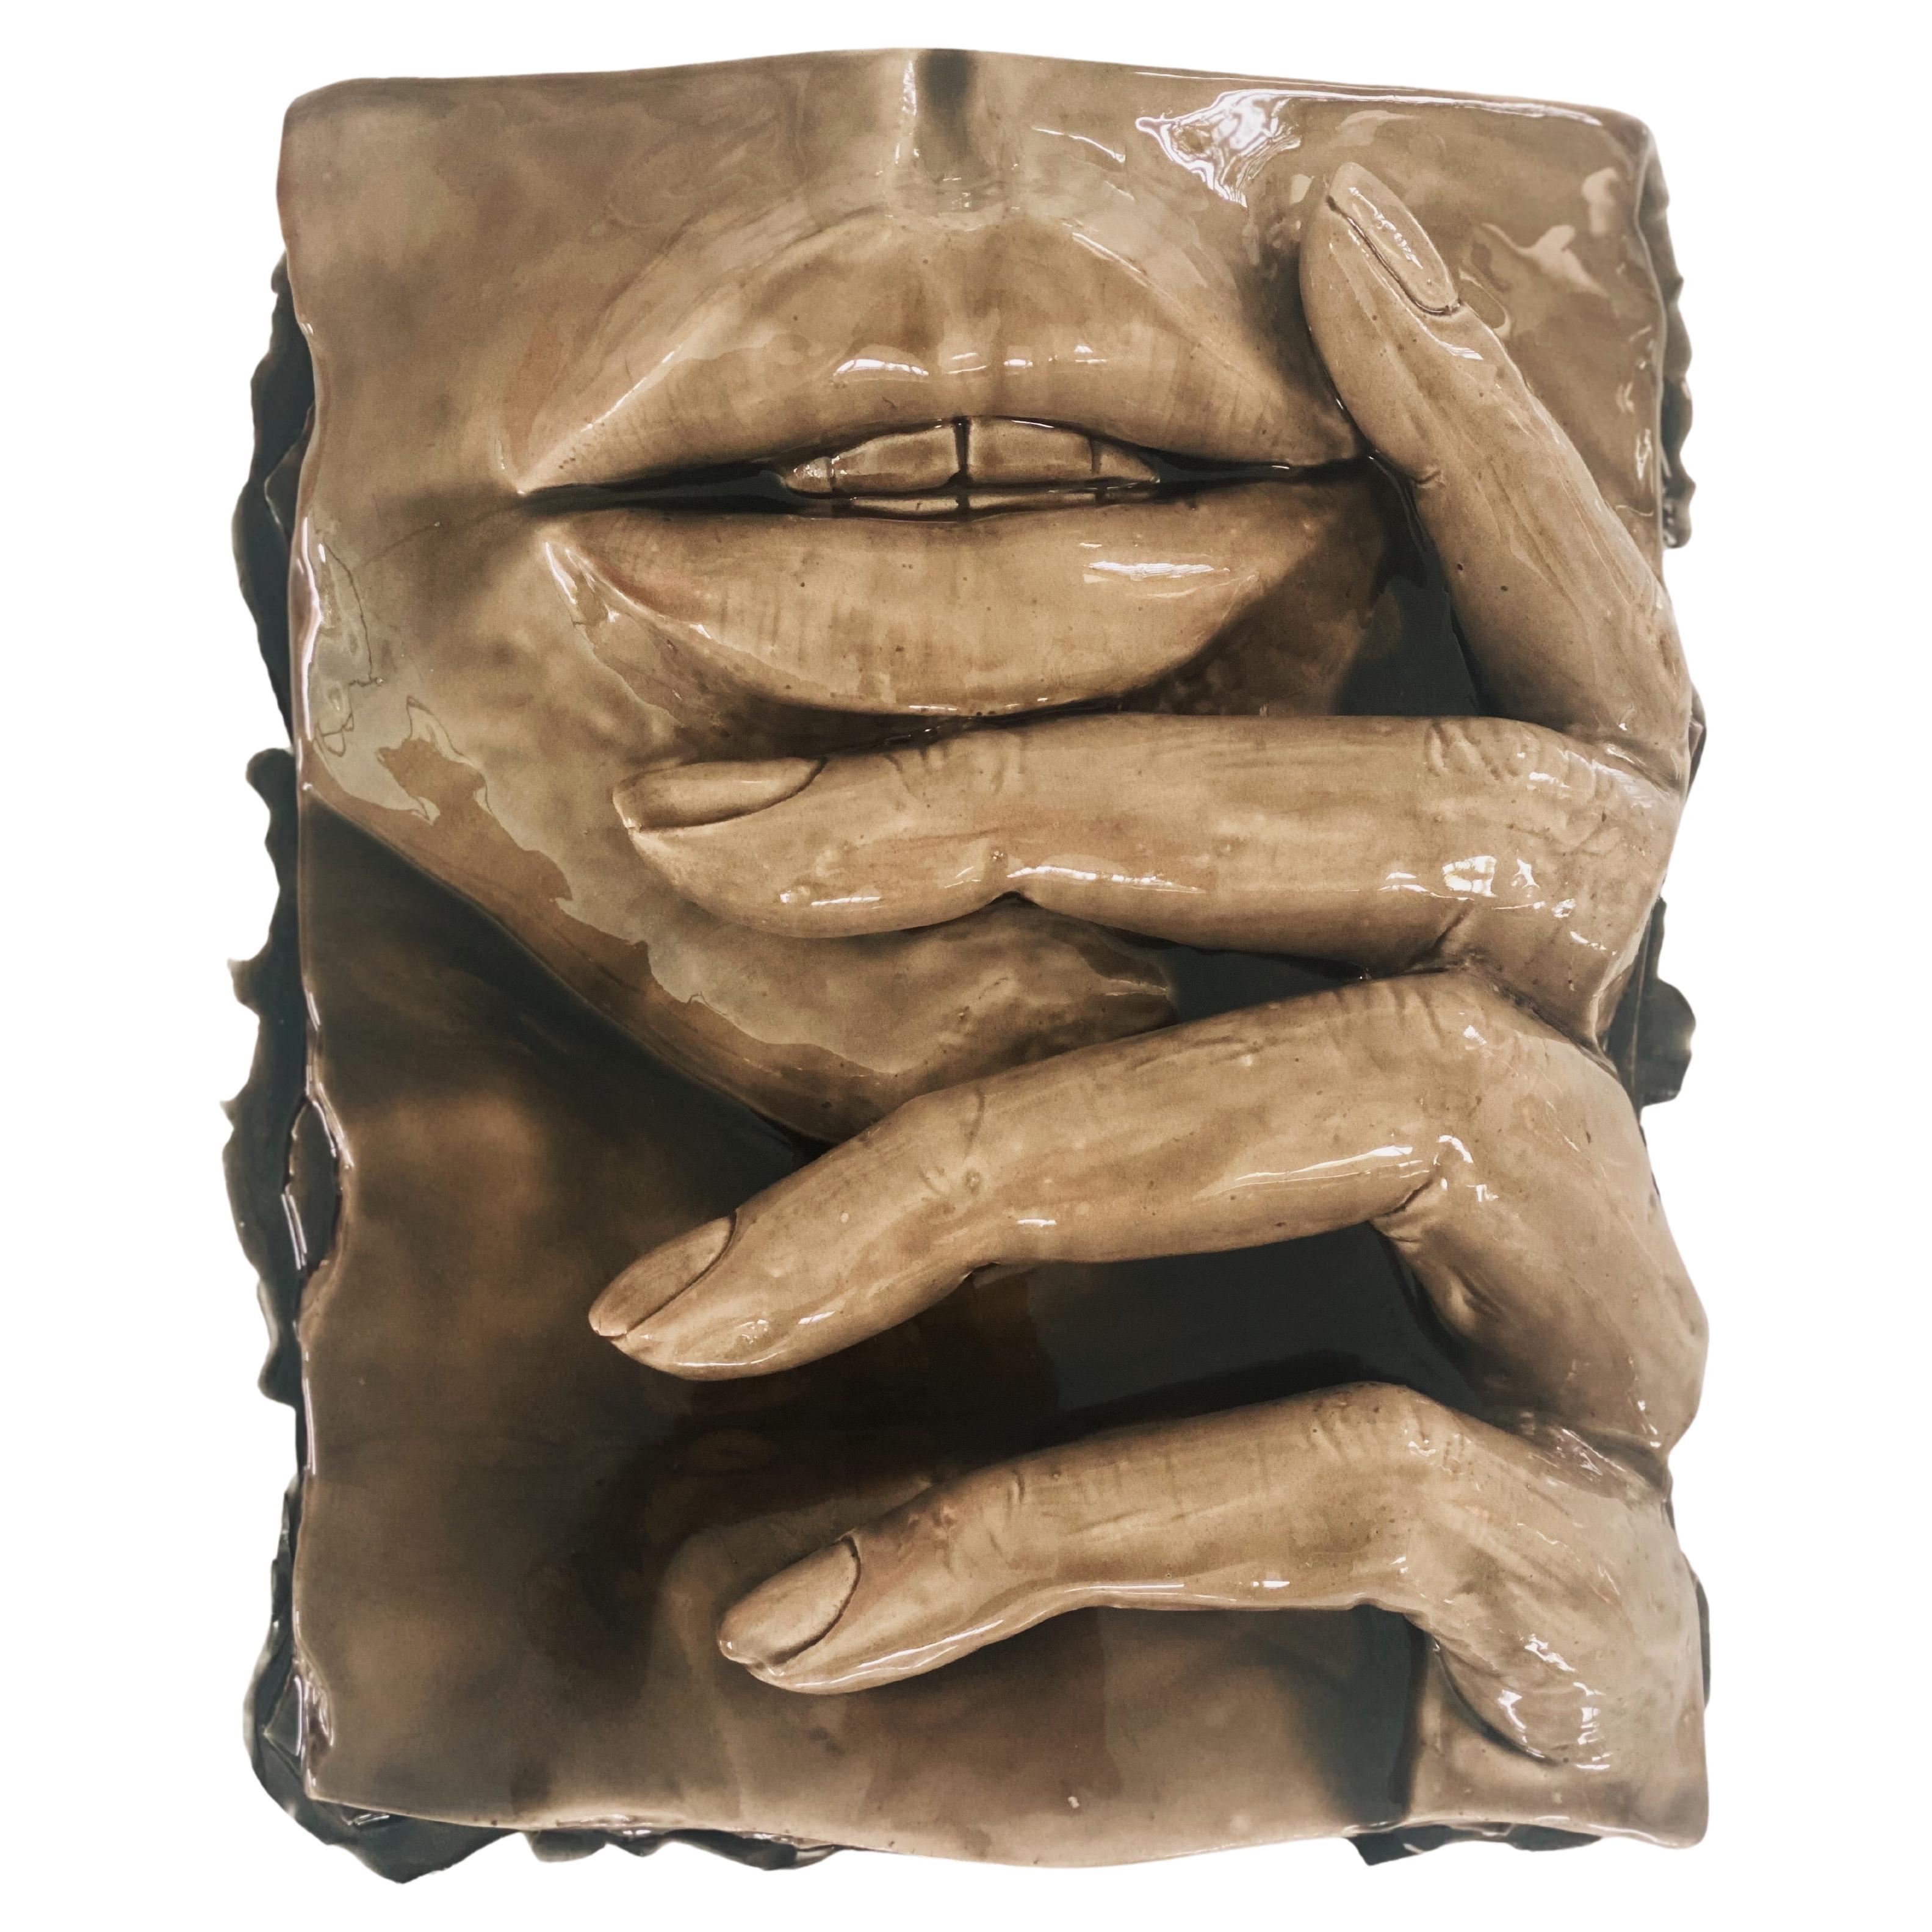 Marcela Cure No. 23 Resin and Stone Wall Sculpture (Women's Face and Hand) For Sale